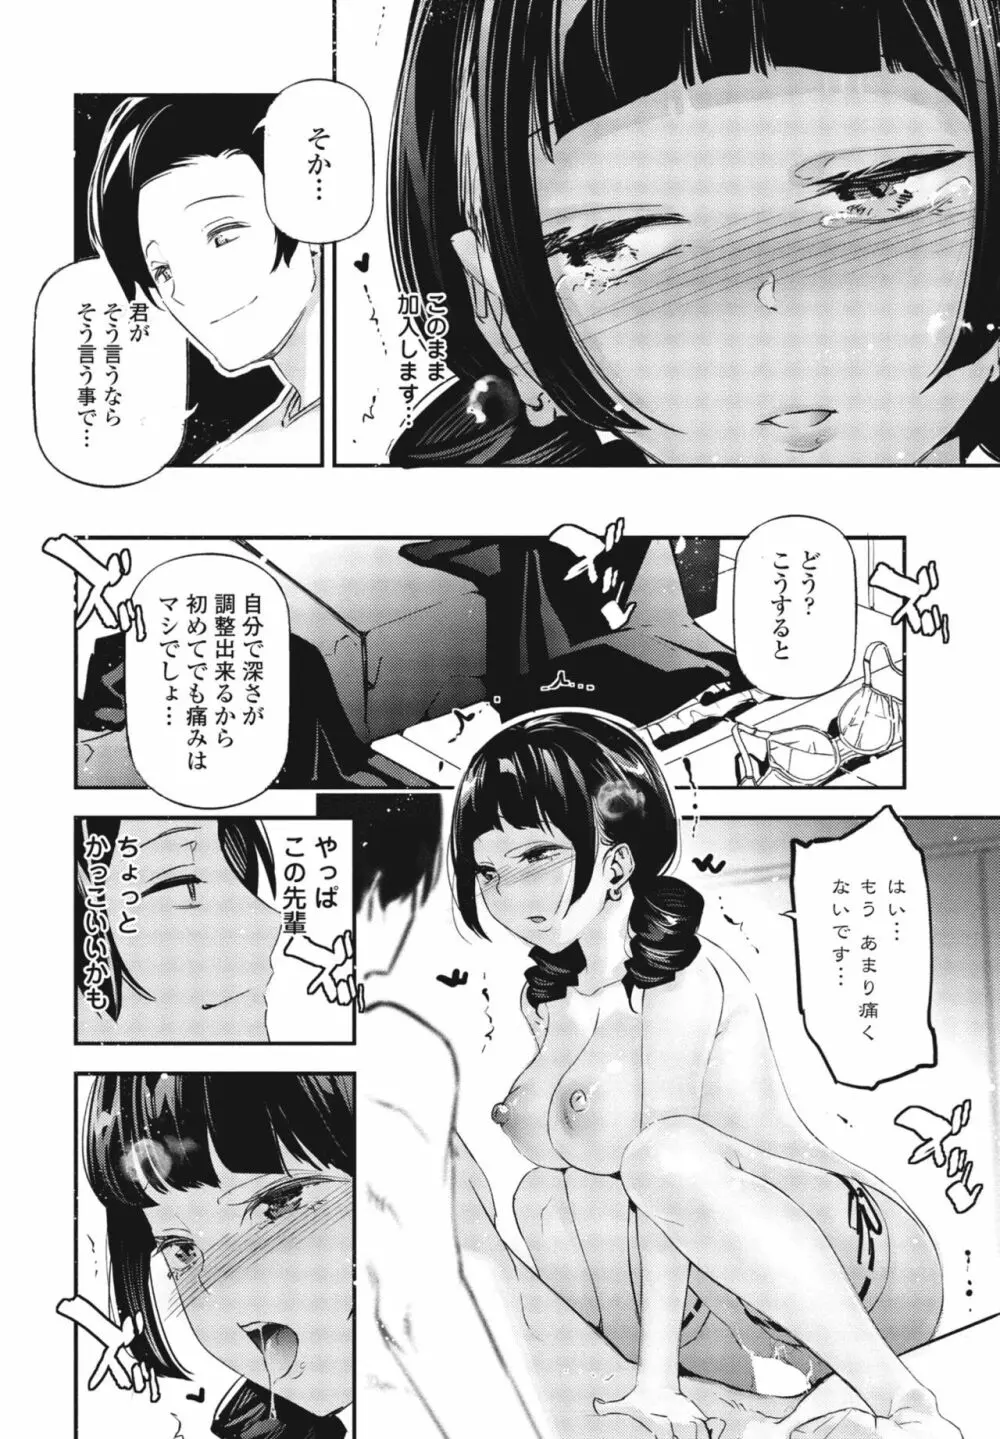 COMIC 桃姫DEEPEST Vol. 3 Page.222